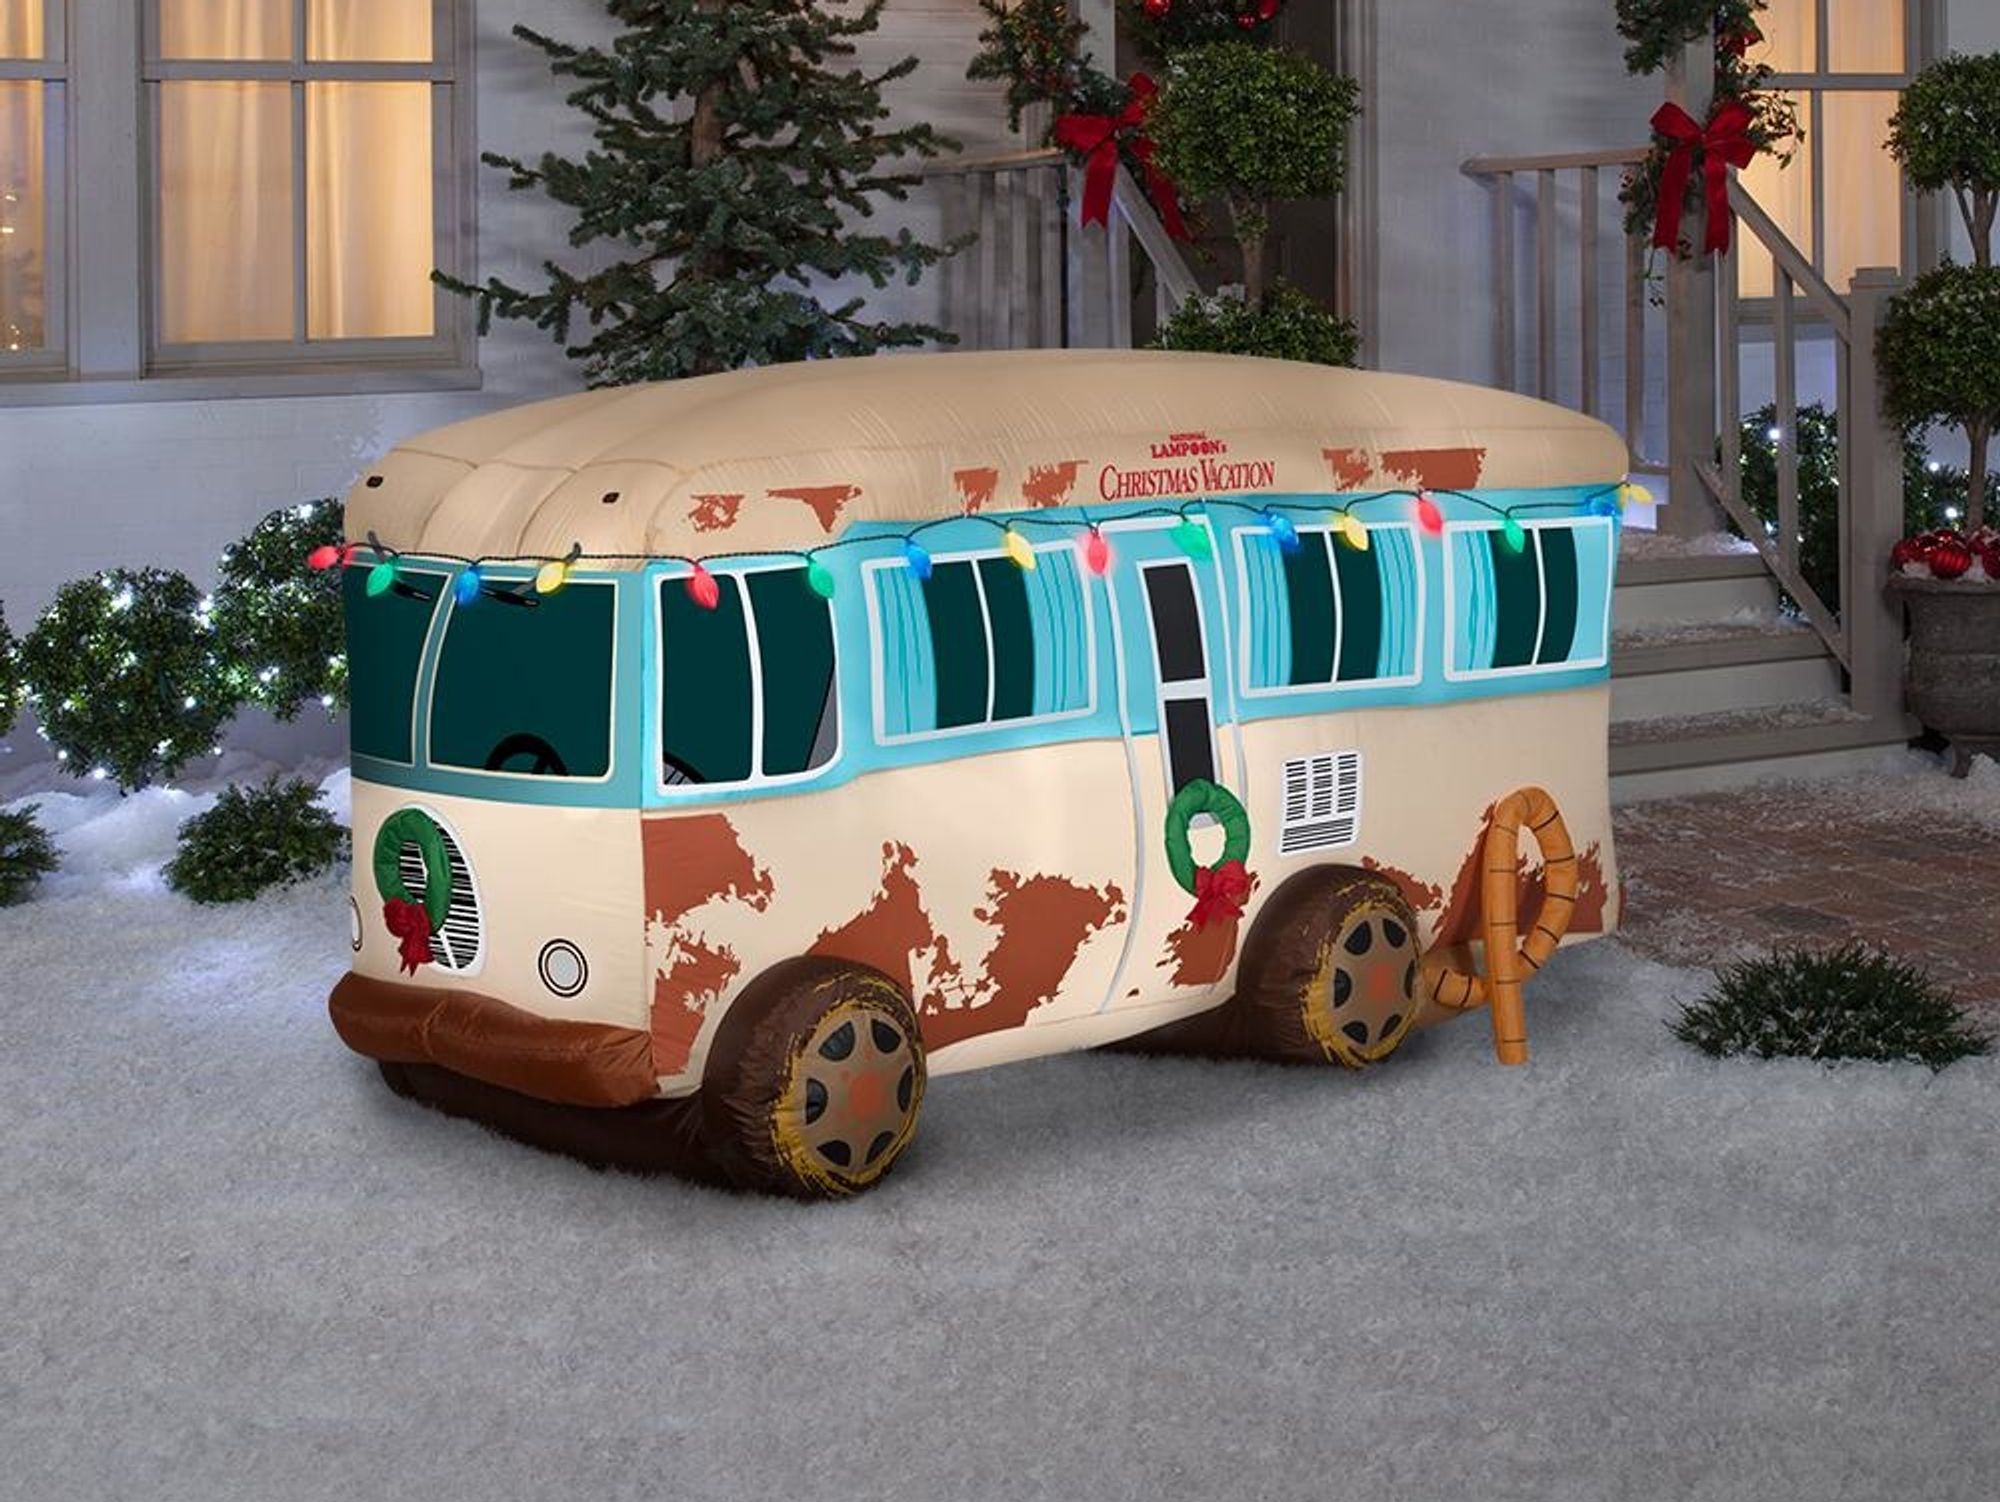 This inflatable \'Christmas Vacation\' RV is peak holiday yard decor ...